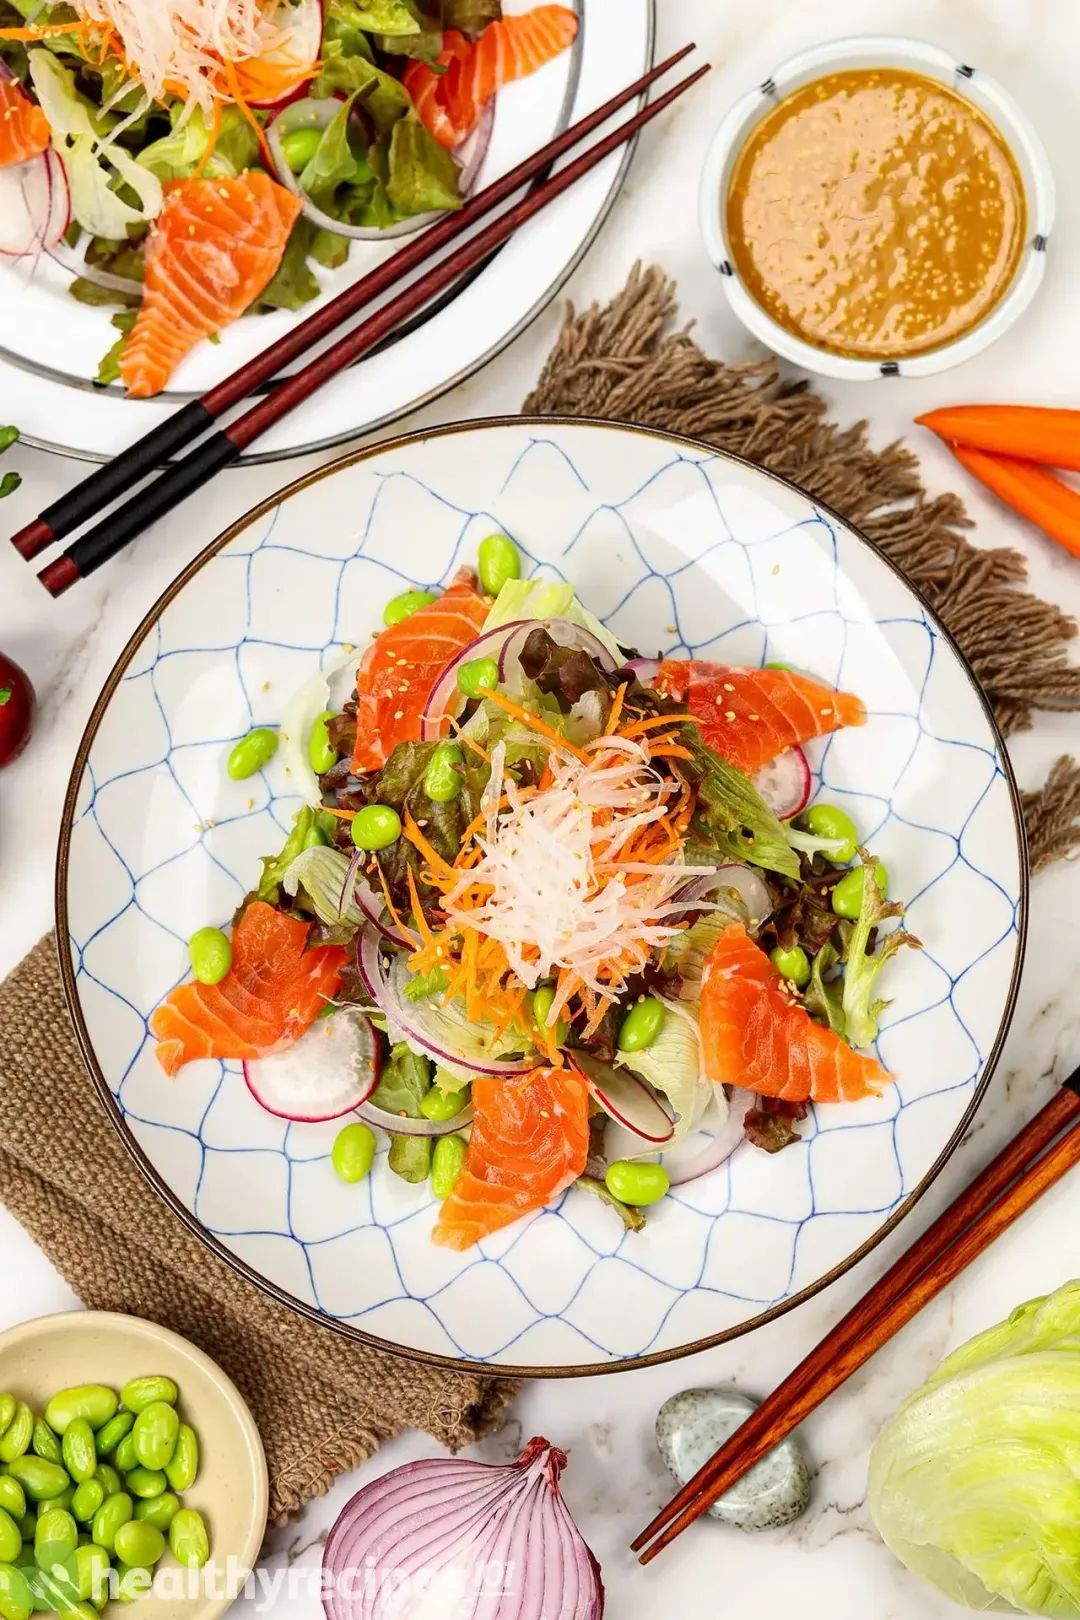 A plate of Japanese salmon salad on a tablecloth alongside another plate, a bowl of dressing, and chopsticks